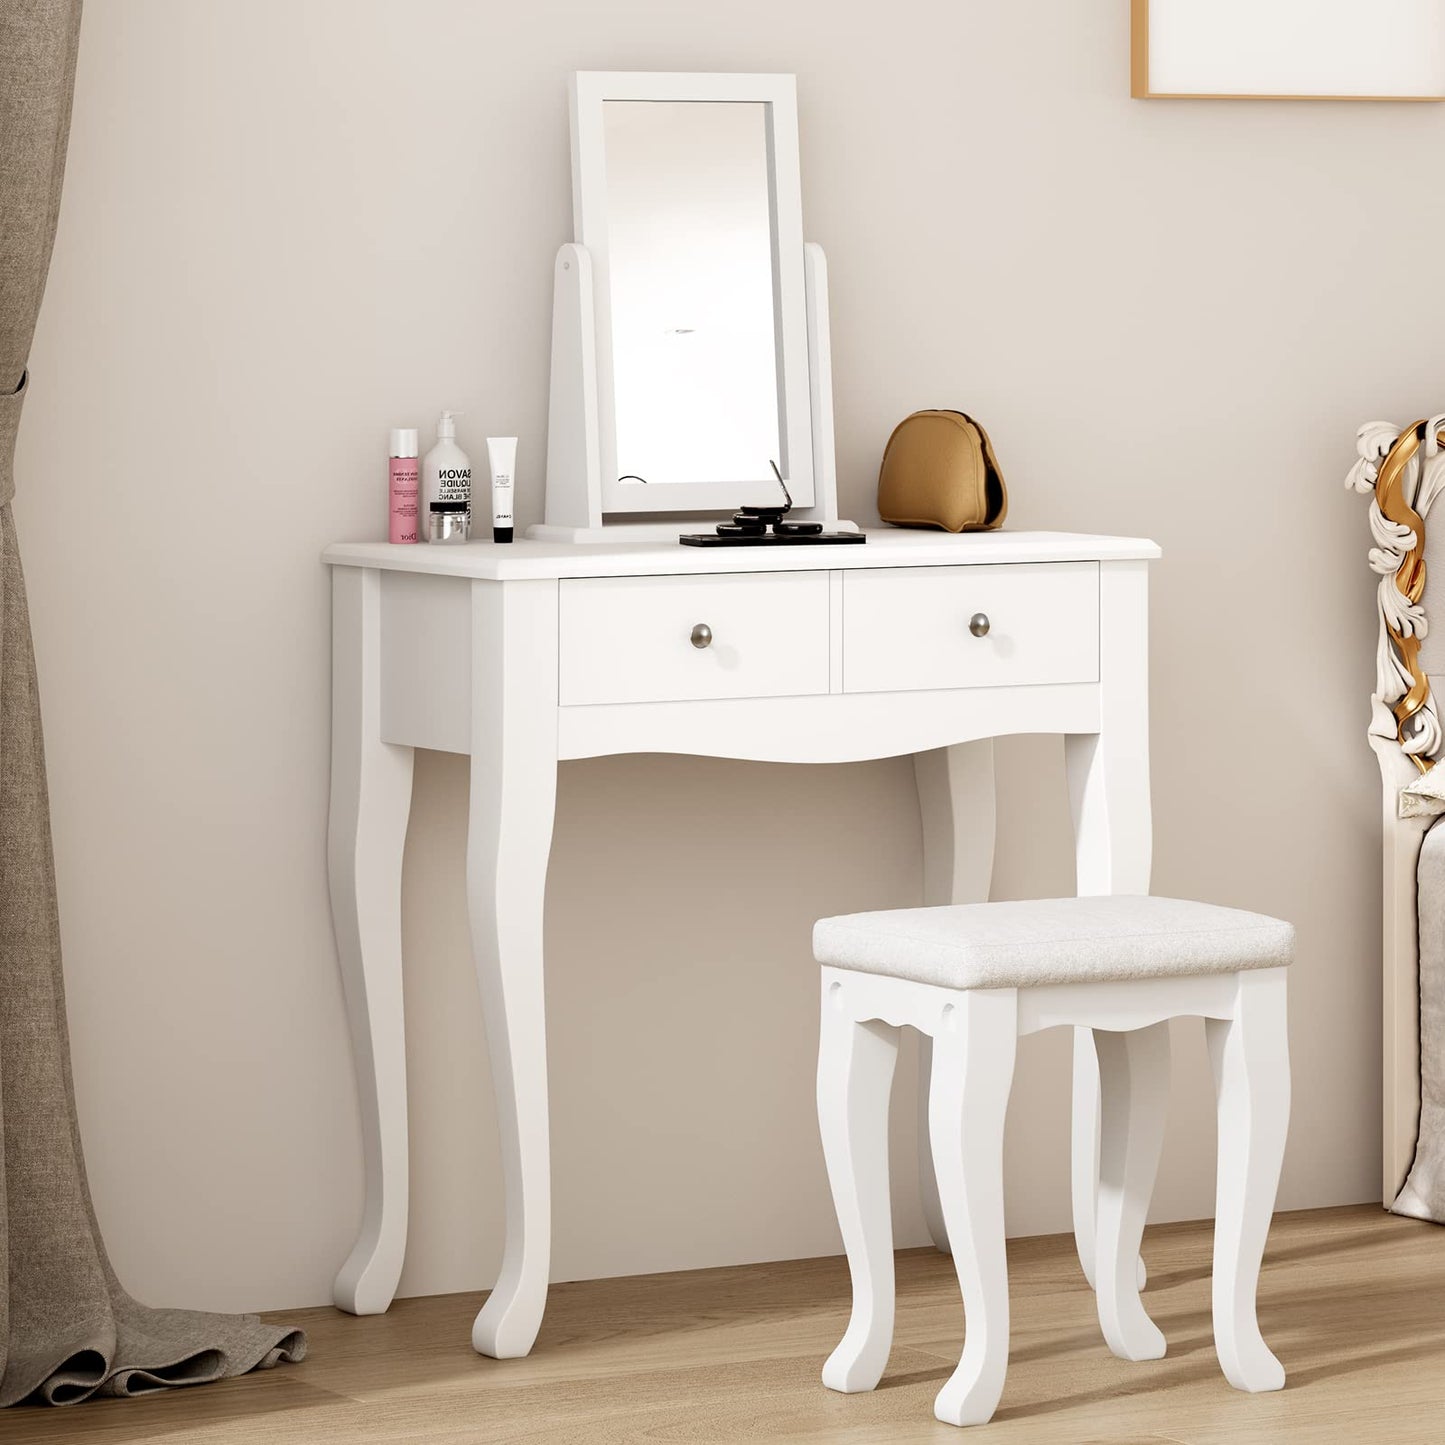 SogesHome Vanity Table Sets with Moveable Mirror and Padded Stool, Makeup Desk with 2-Drawers, Classic White Dressing Table Vanity Desk with Cured Leg for Bedroom, Makeup Studio, Dormitory